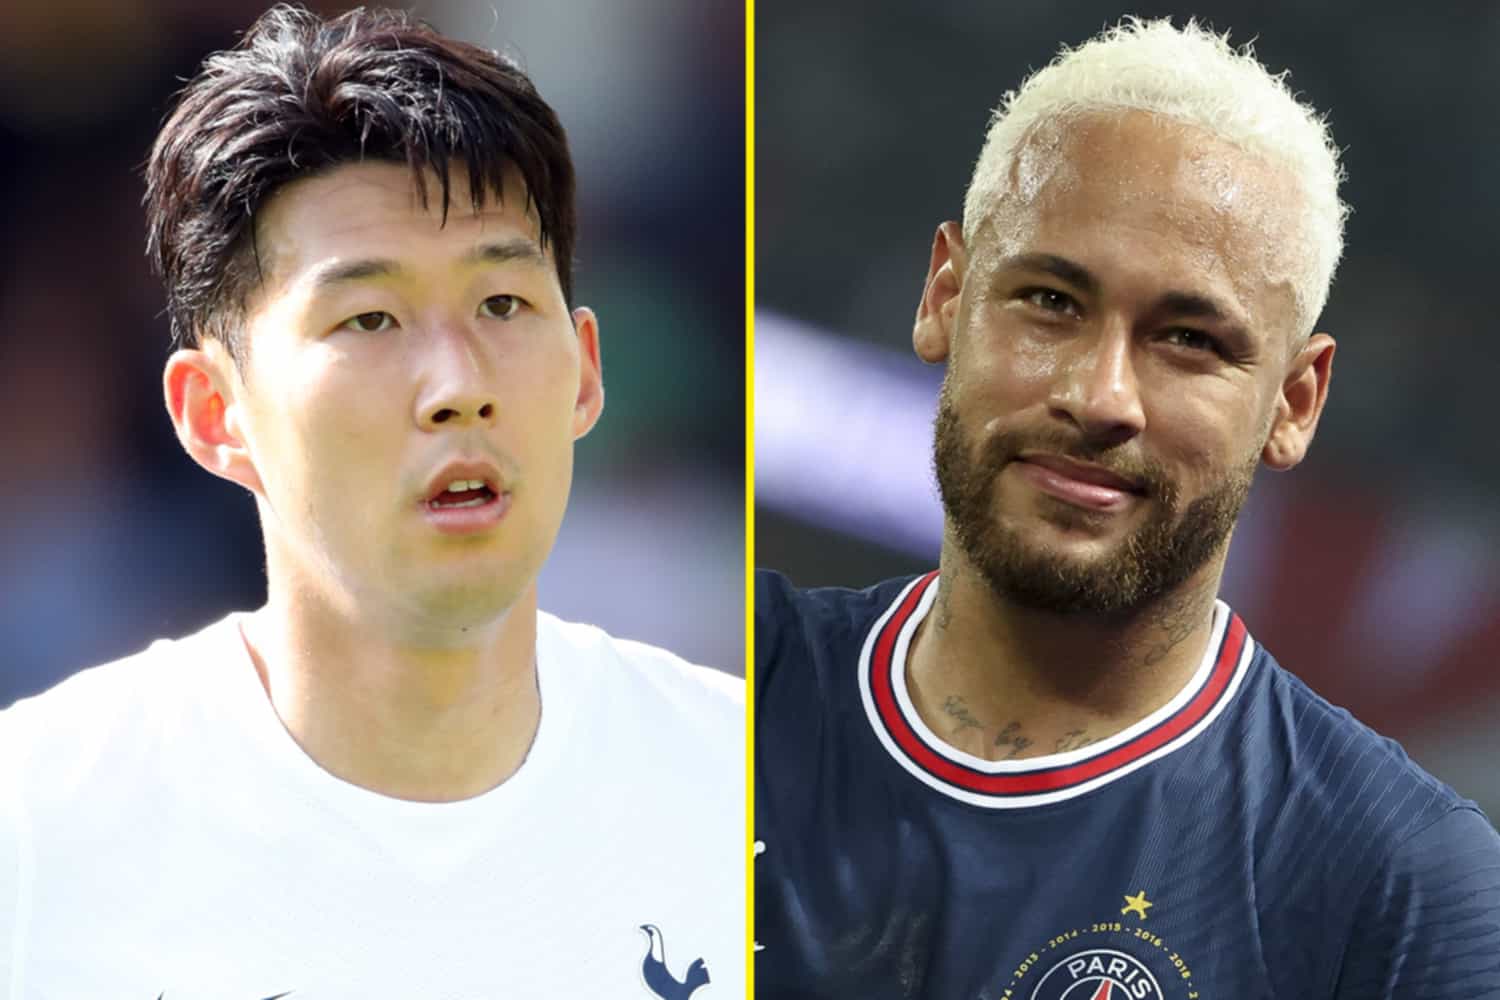 Heung-min Son names Neymar as ‘best player in the world’ over Lionel Messi and Cristiano Ronaldo as Tottenham forward aims to overtake Paris Saint-Germain star